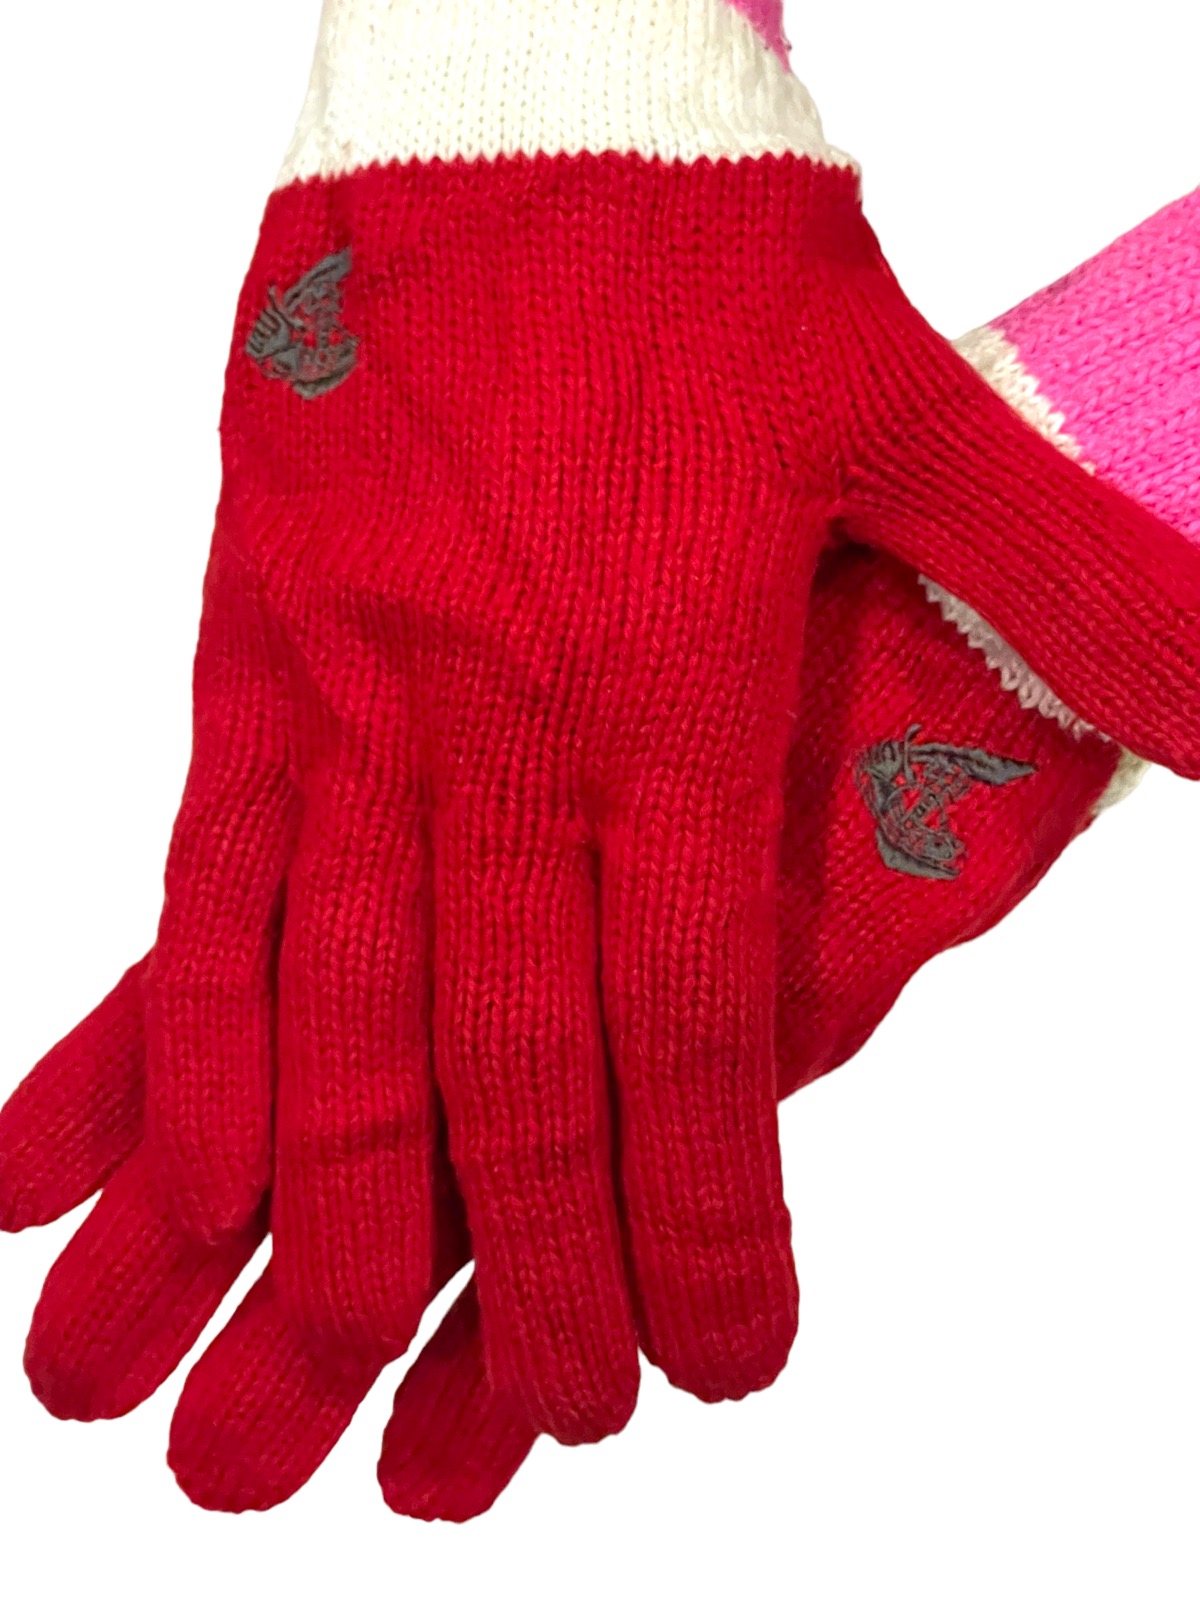 Vivienne Westwood Anglomania Gloves - 1